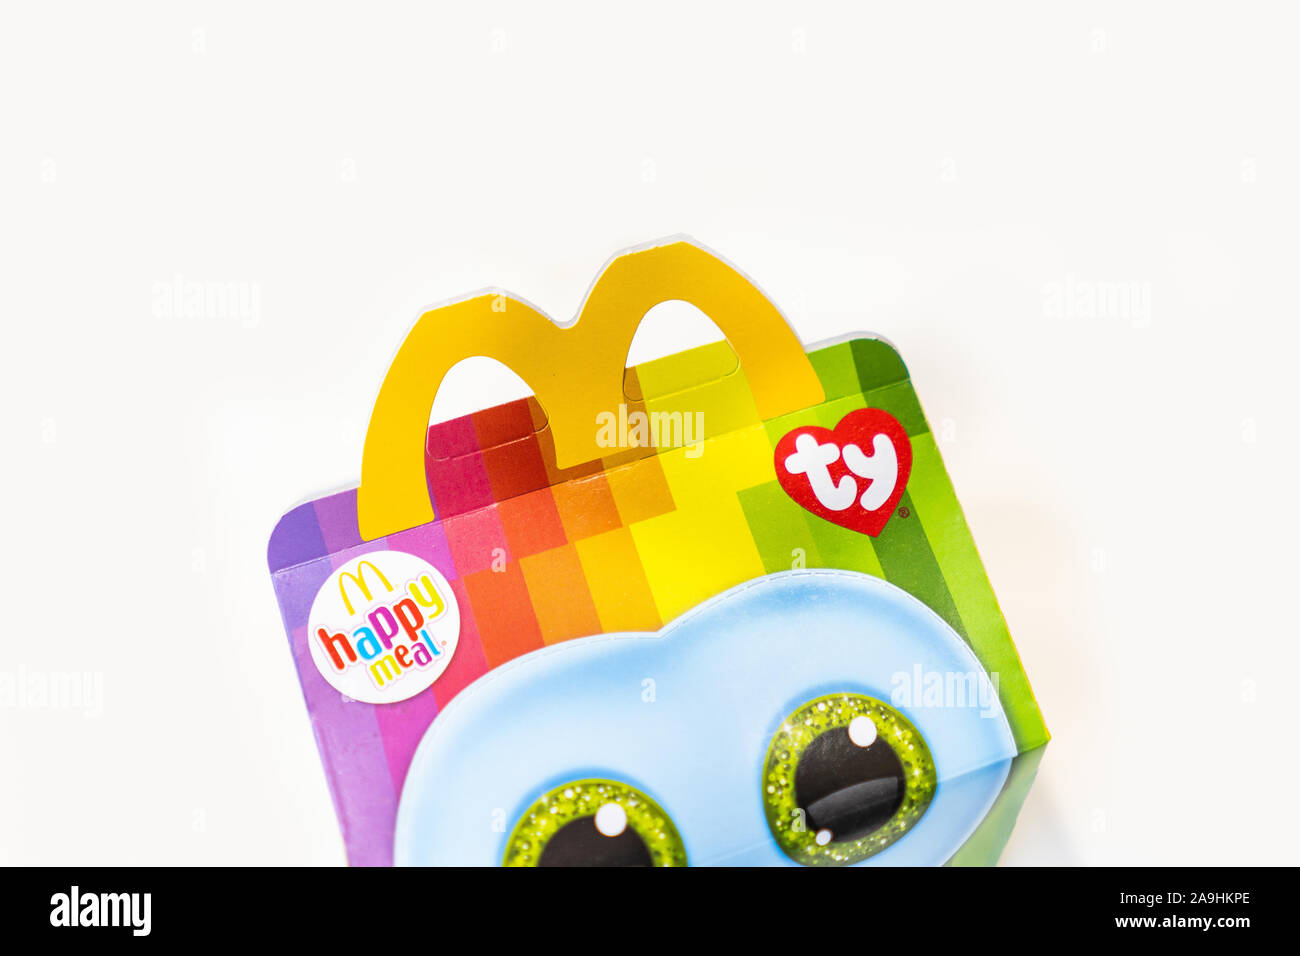 McDonalds Happy meal incorporating the famous TY teddy bear brand famous to children for their glittery eyes and birthdays, children's meals Stock Photo